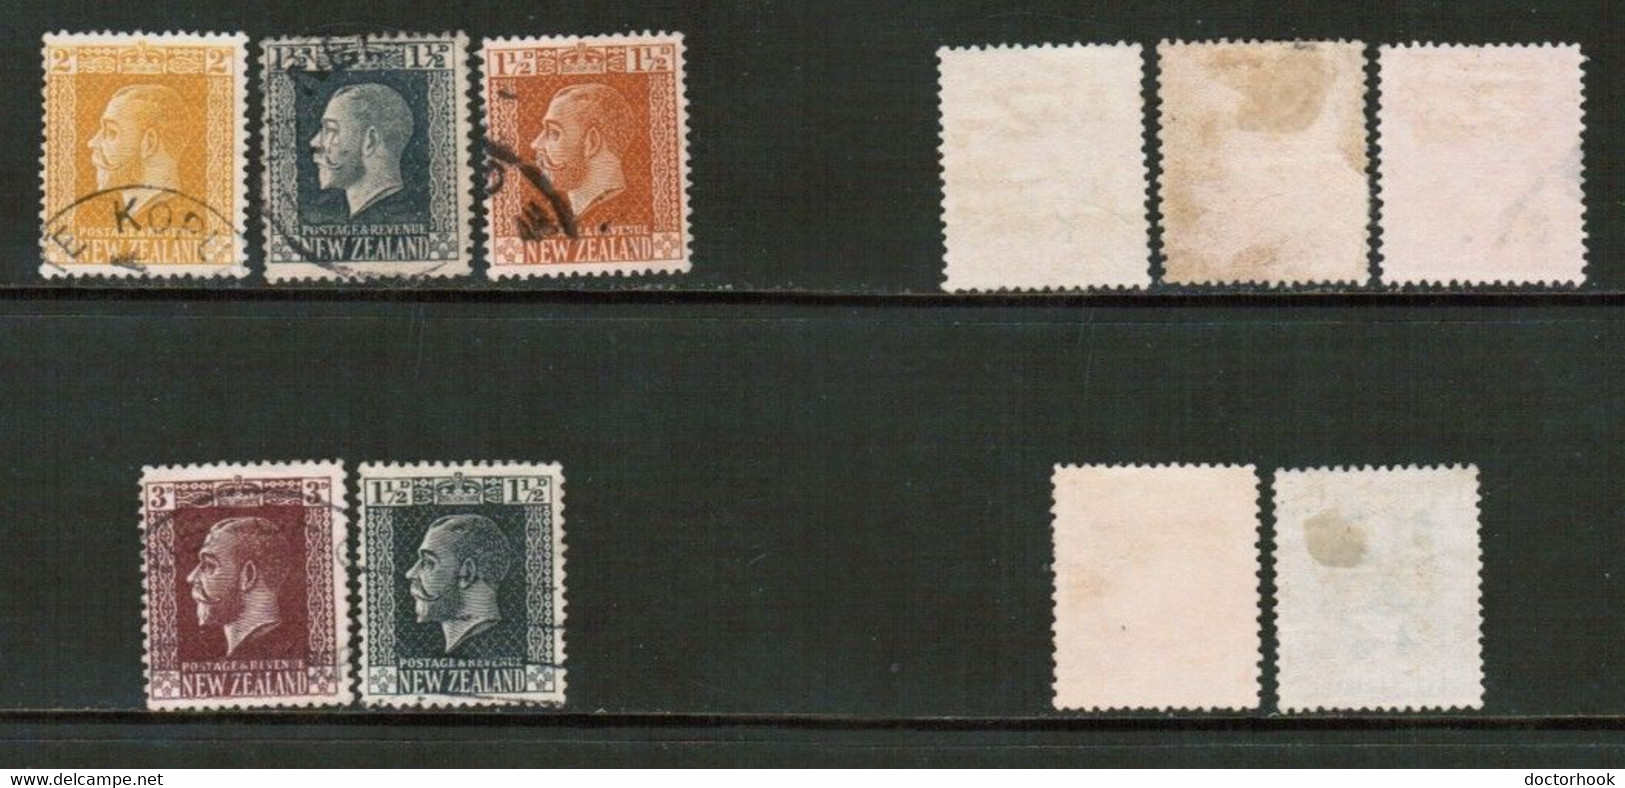 NEW ZEALAND   Scott # 160-4 USED (CONDITION AS PER SCAN) (WW-1-64) - Usati